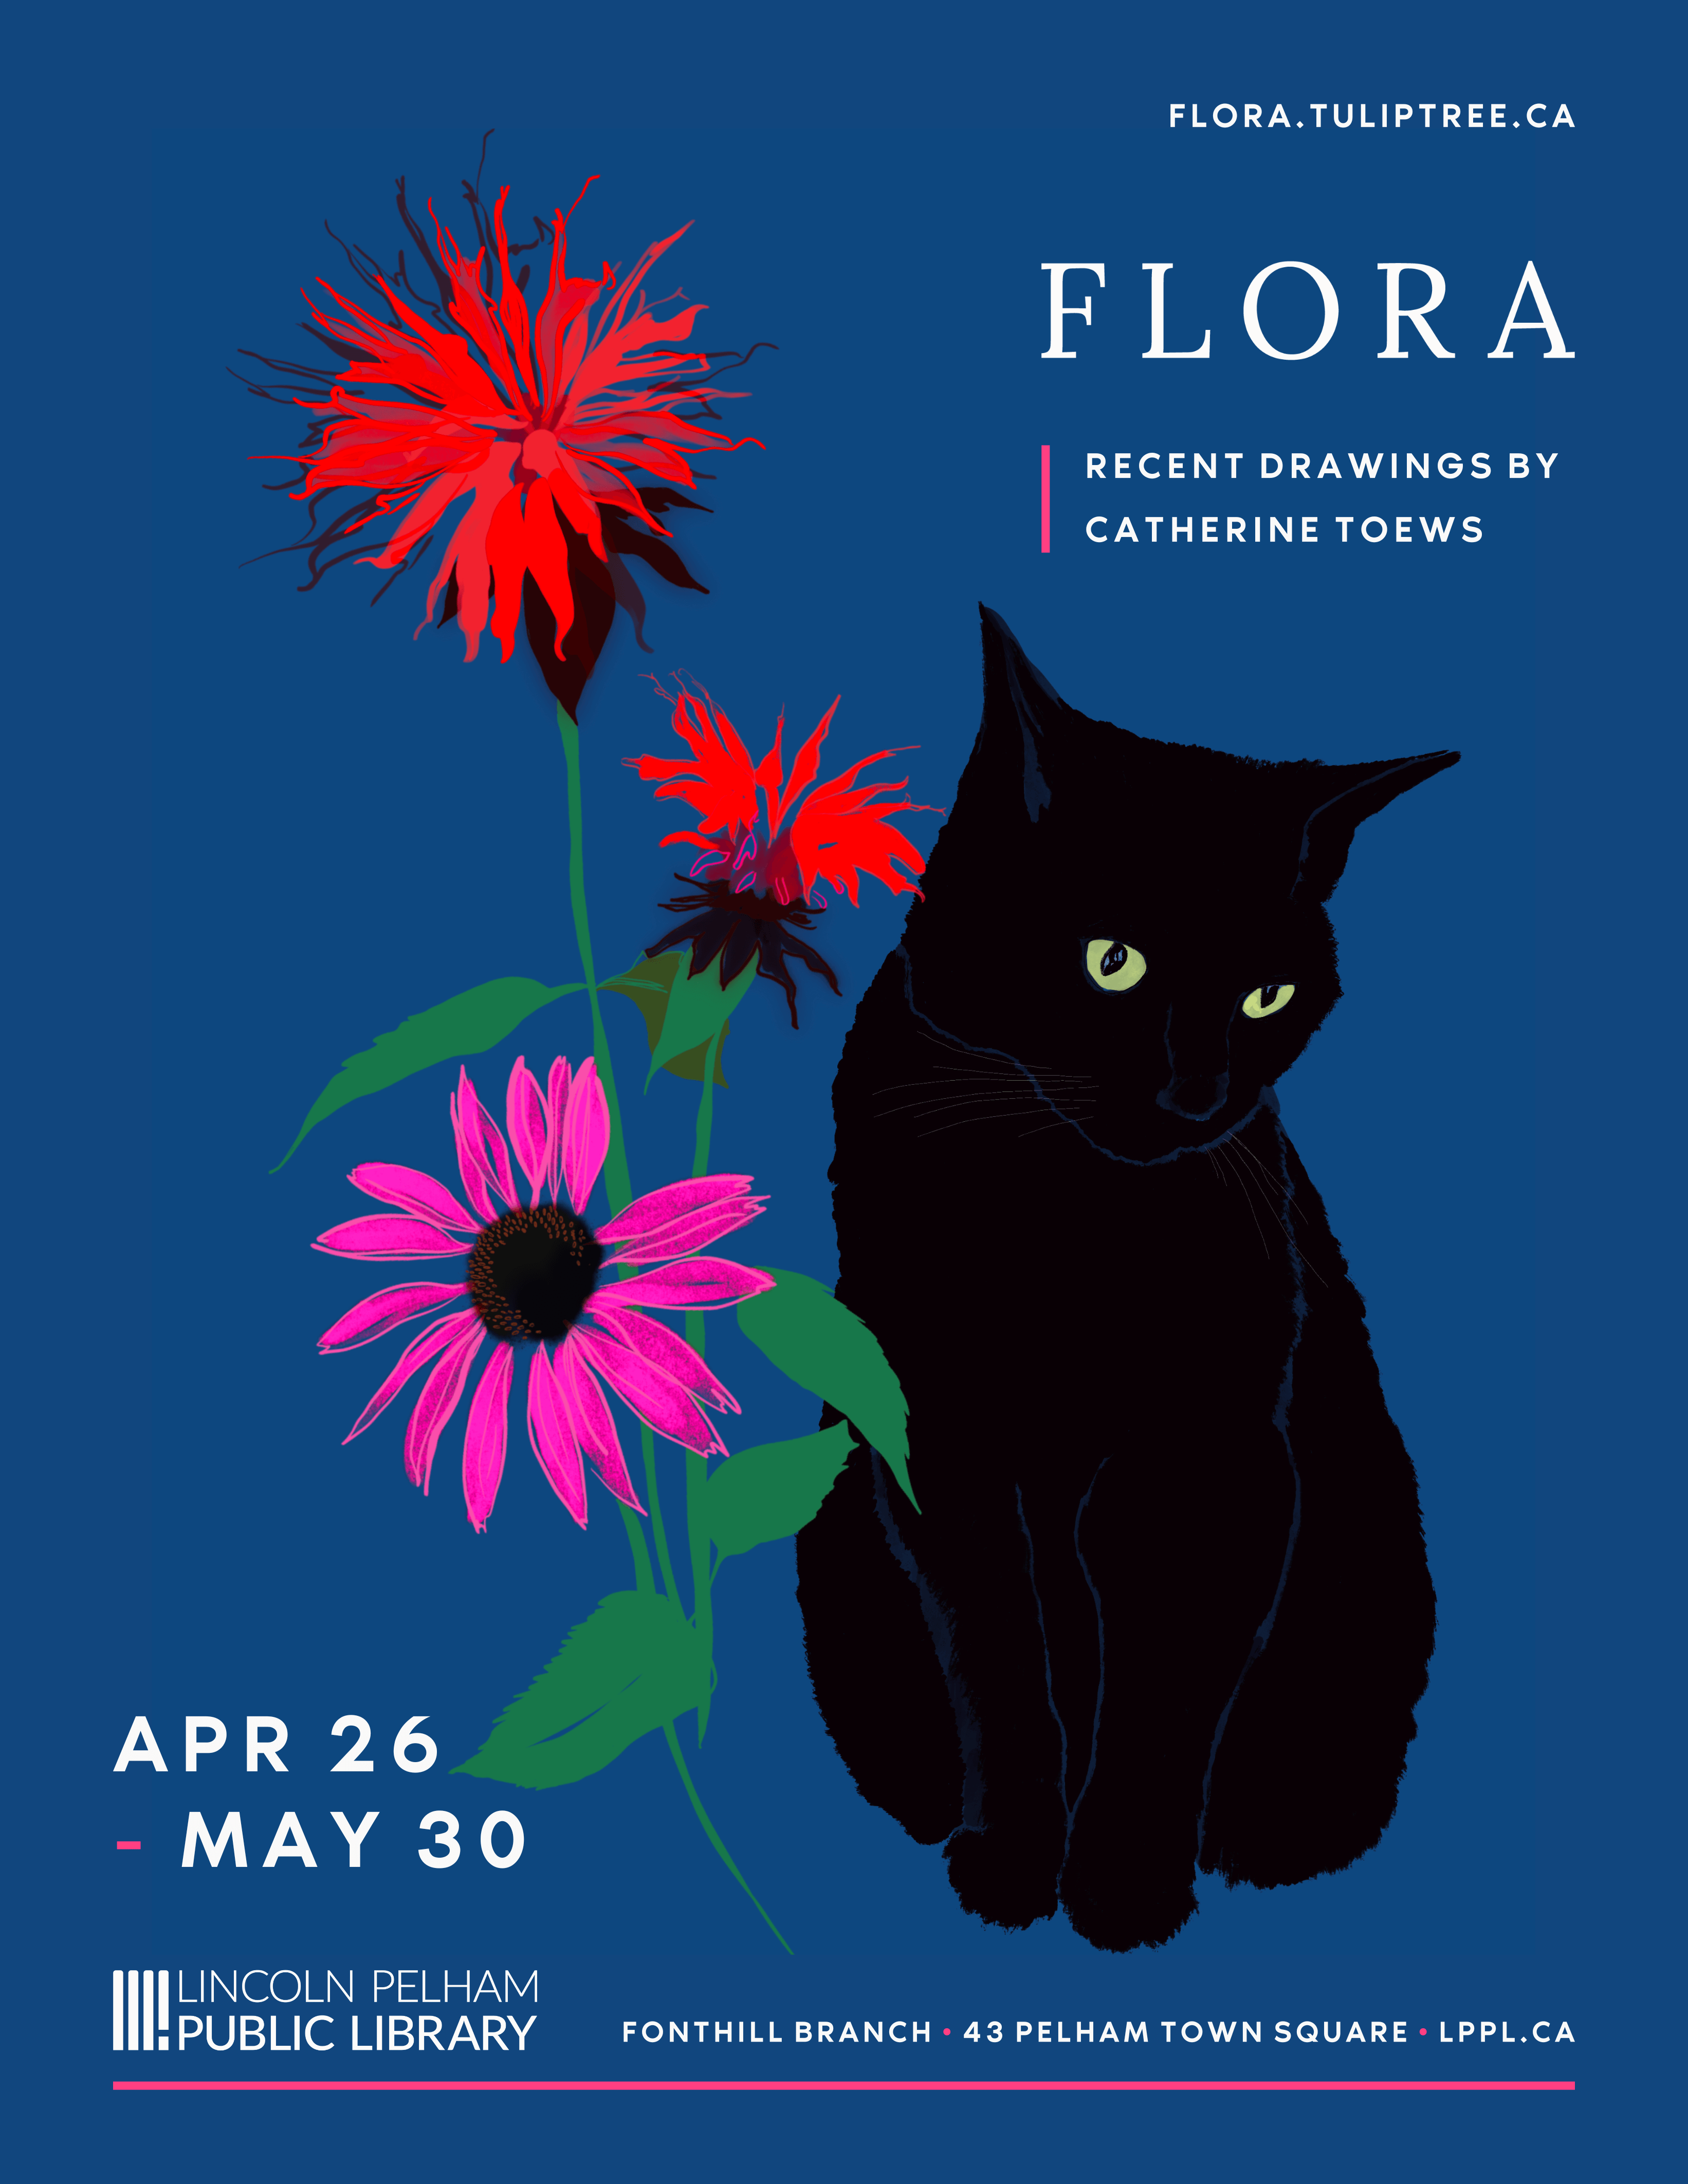 FLORA art exhibition by Catherine Toews